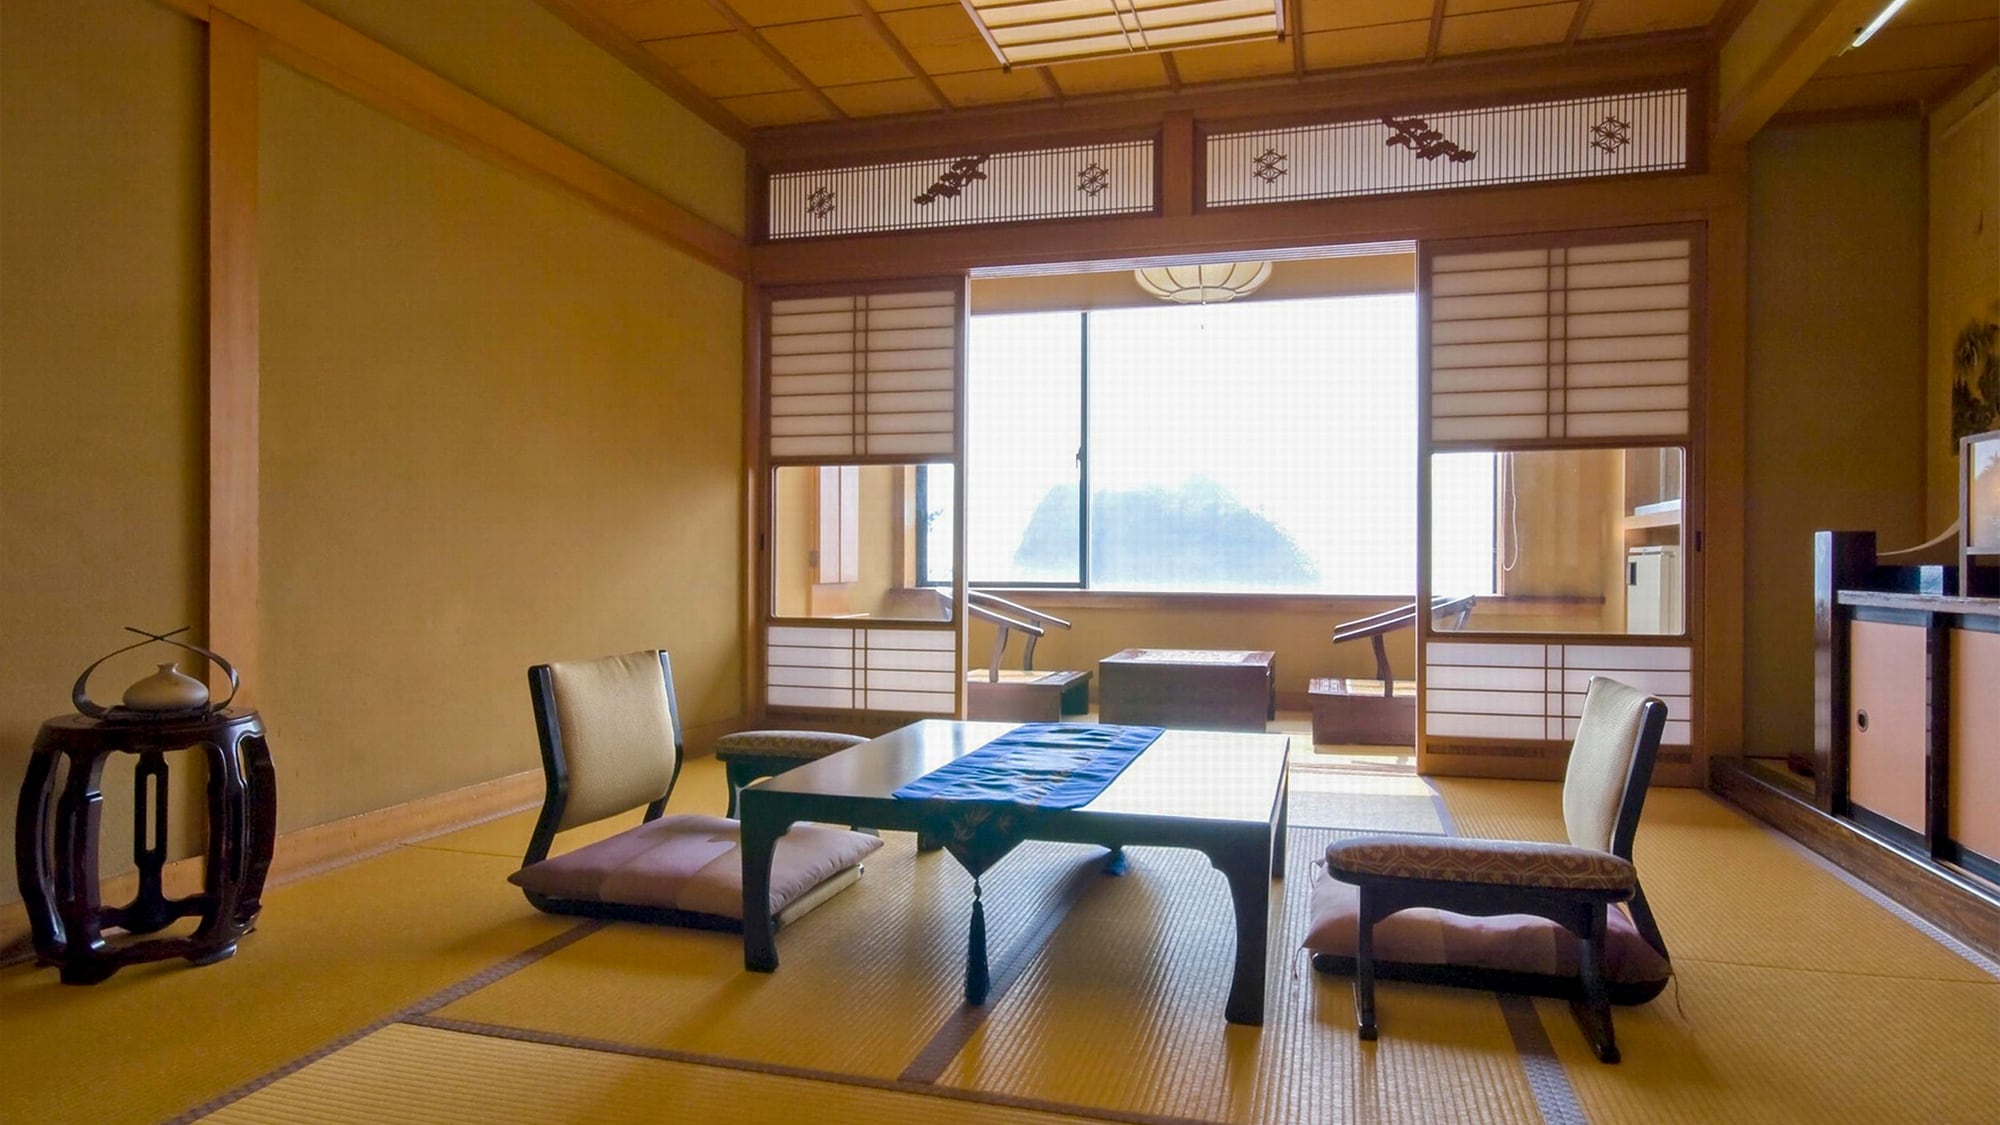 ■ Standard room | Relax with the beautiful scenery and Japanese atmosphere that spreads out from the window